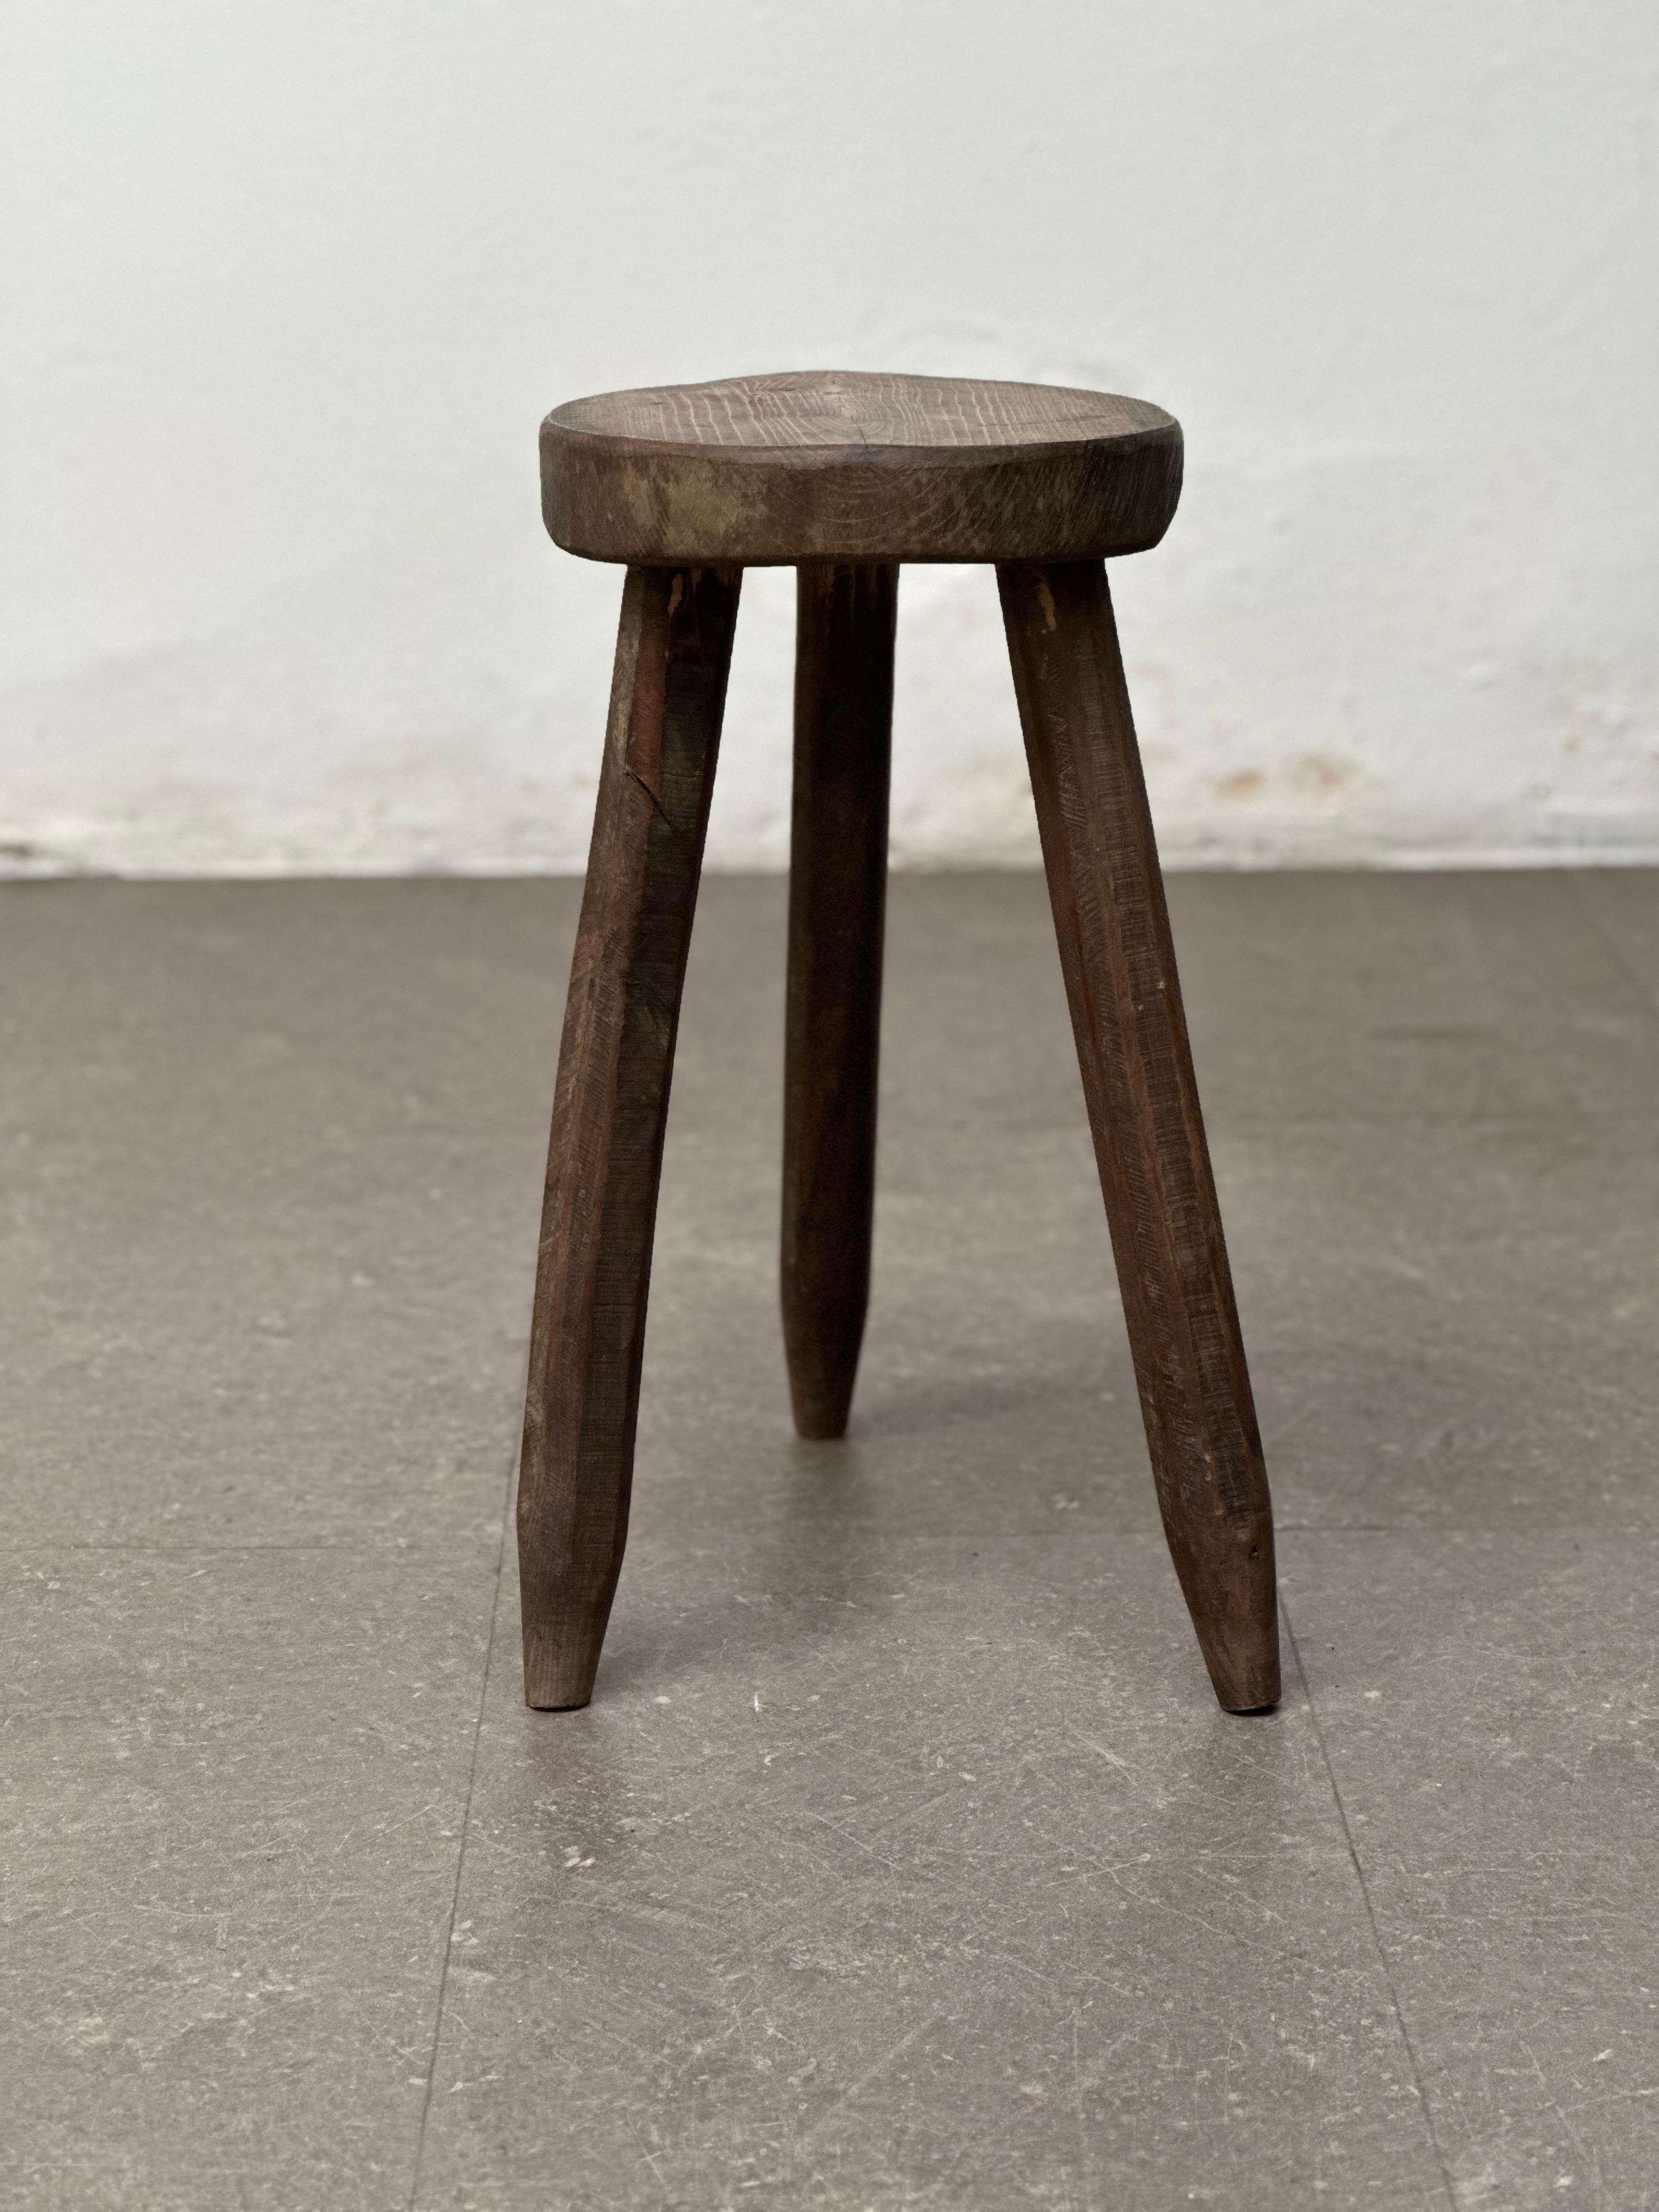 French Brutalist Tripod Stool, 1960s - Embrace the Charm of Primitive Elegance

Indulge in the captivating allure of the French Brutalist Tripod Stool, a remarkable piece that exudes a delightful primitive aesthetic. Crafted during the 1960s, this